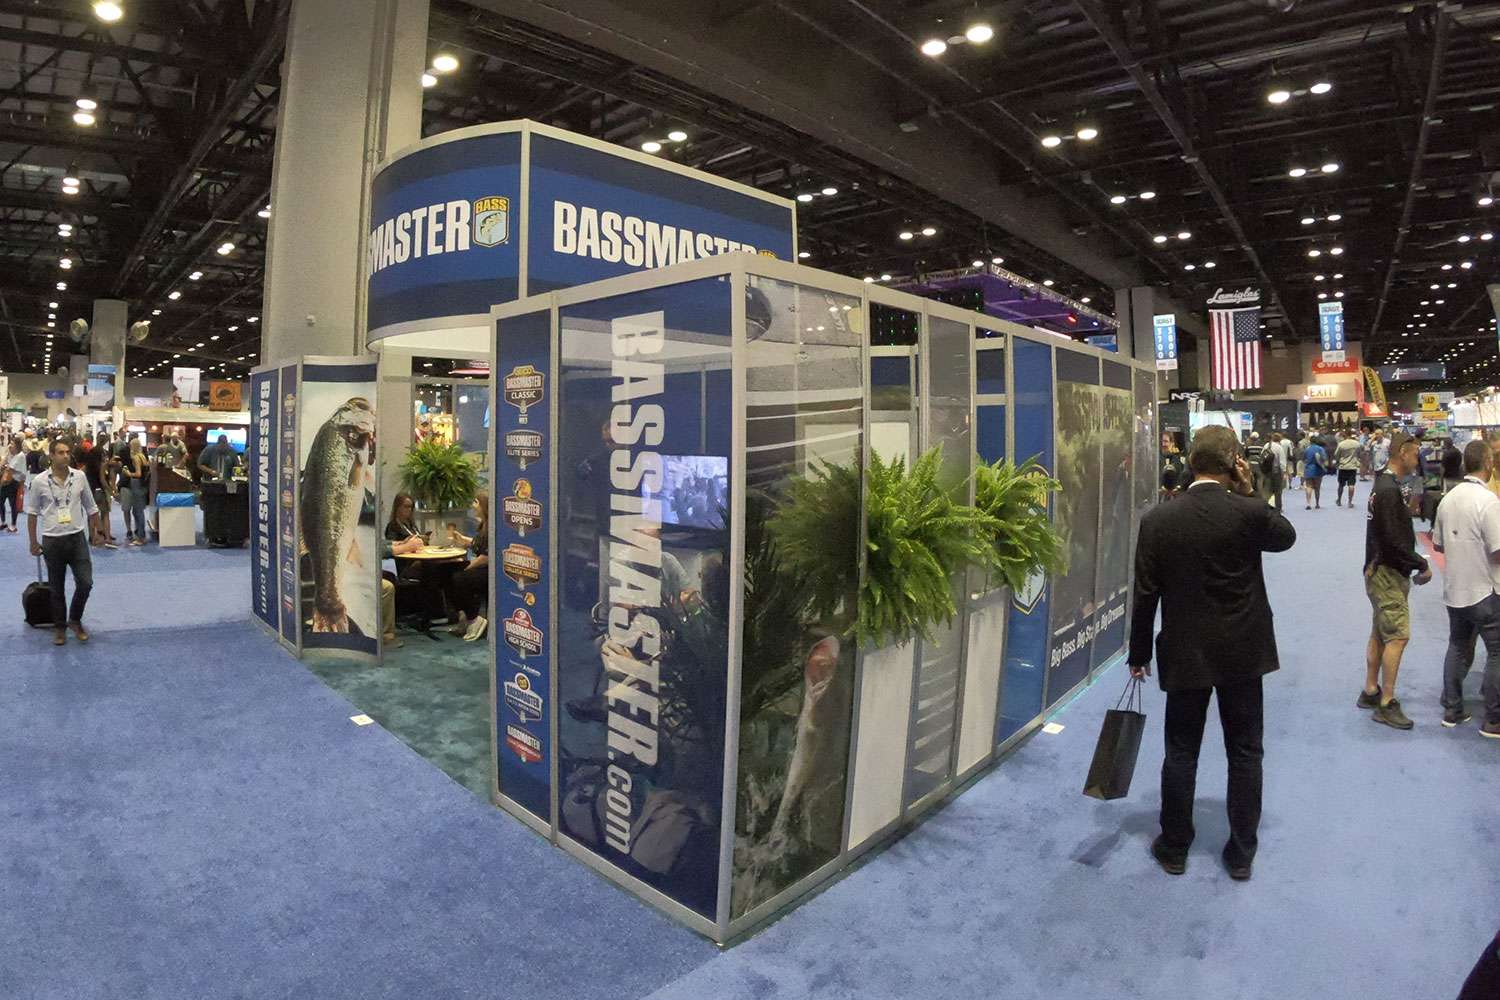 Enjoy an inside look at a few of the booths set up on the show floor at ICAST 2019 in Orlando, Fla.